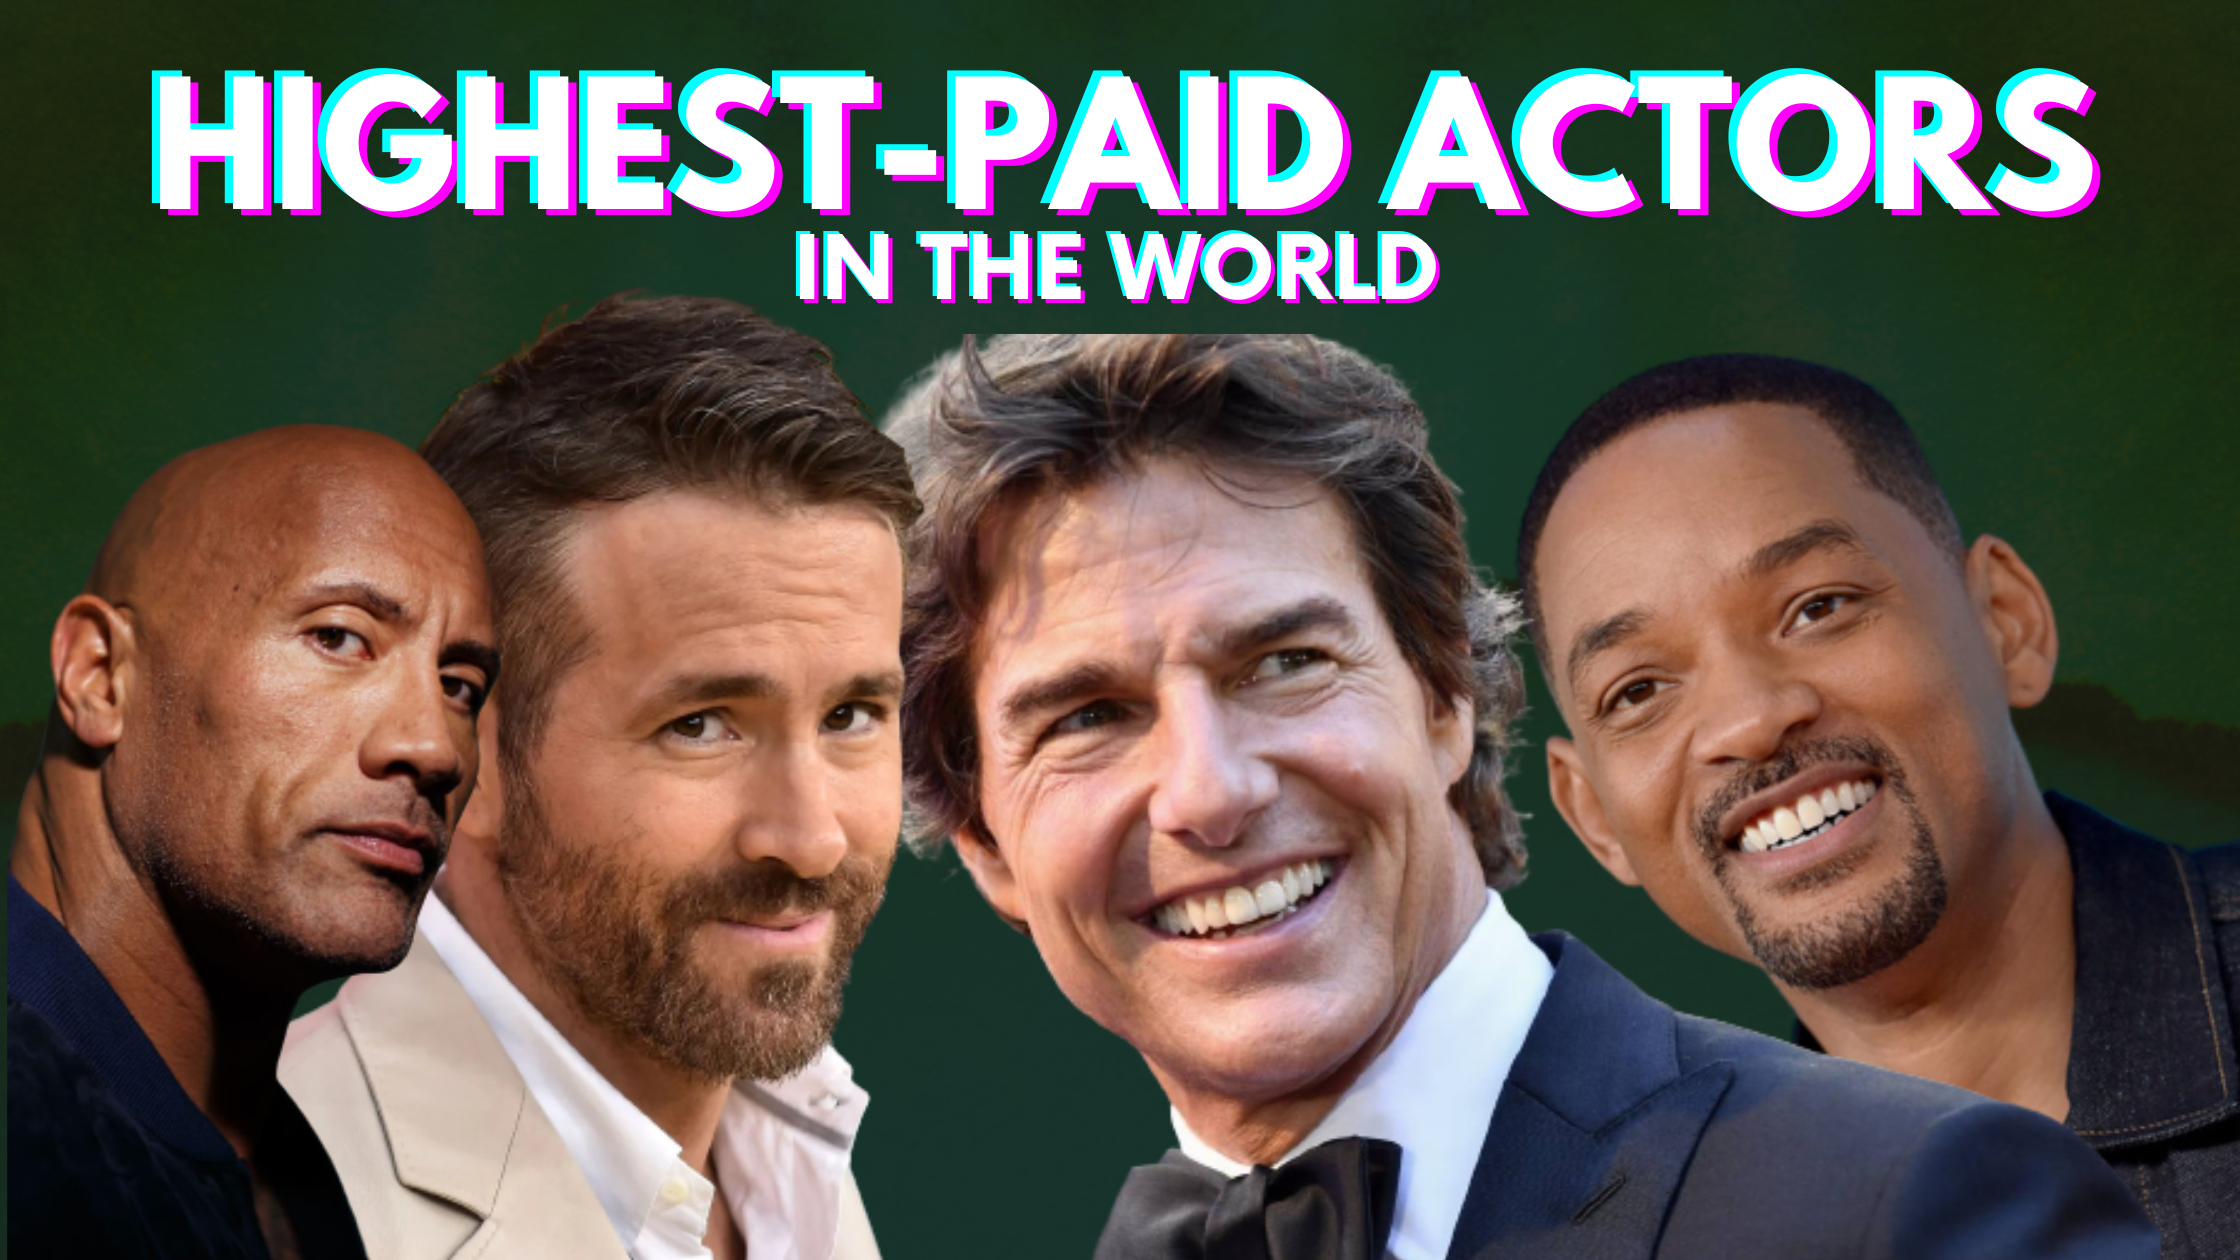 Top 10 Highest-Paid Actors In The World